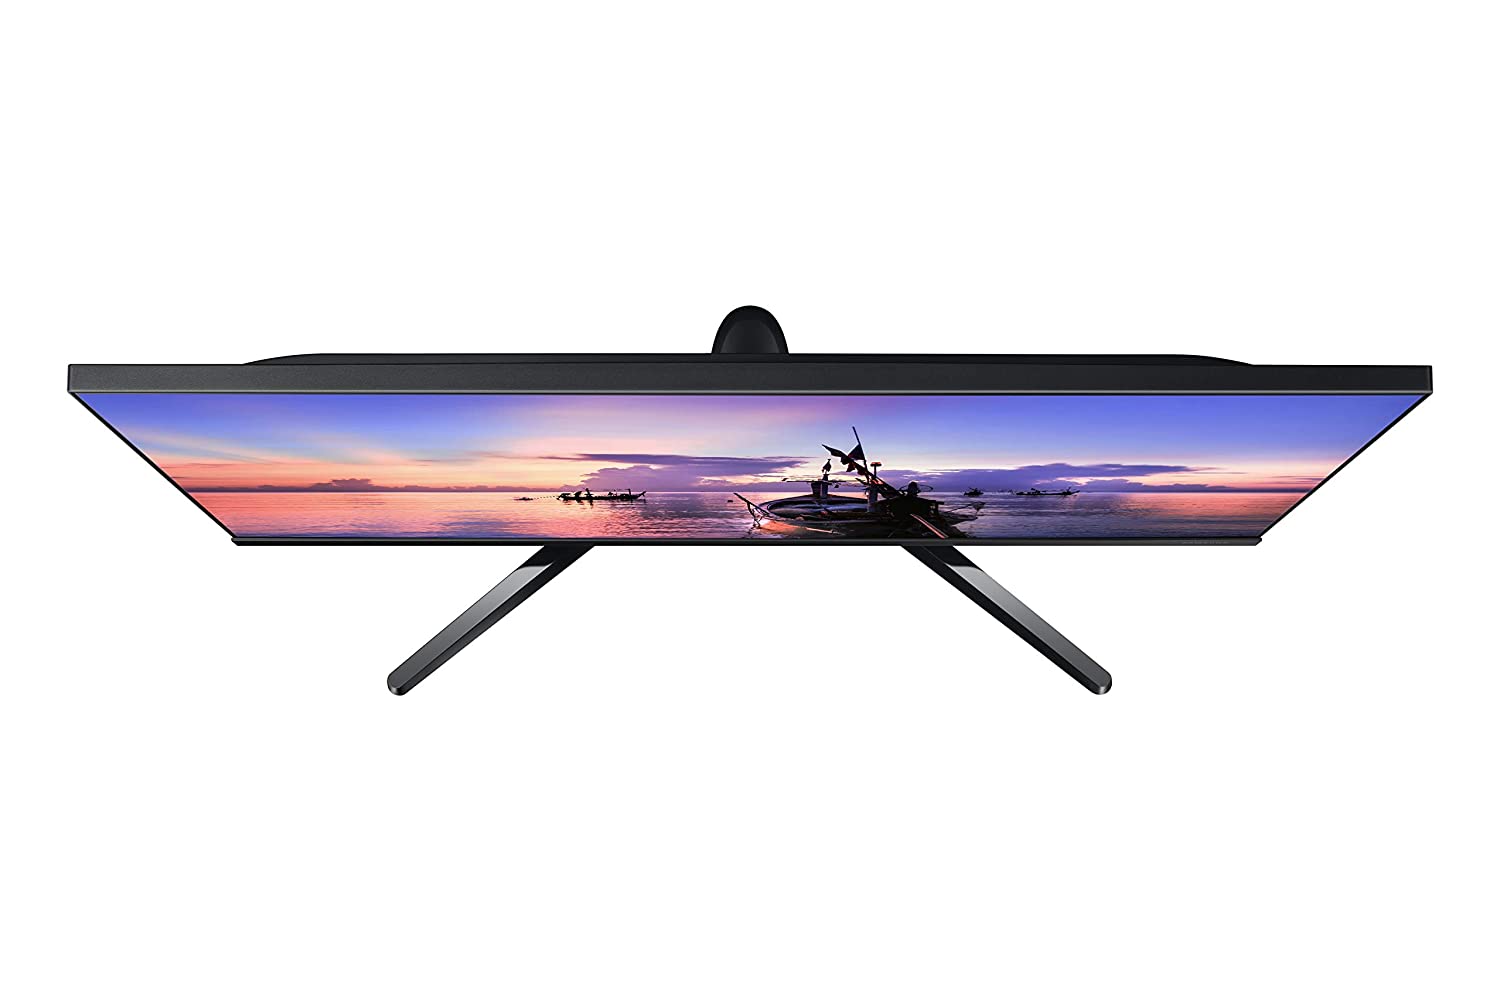 Samsung 60.9cm (24.0") IPS panel Flat Monitor with 3-sided borderless design (LF24T352FHWXXL)